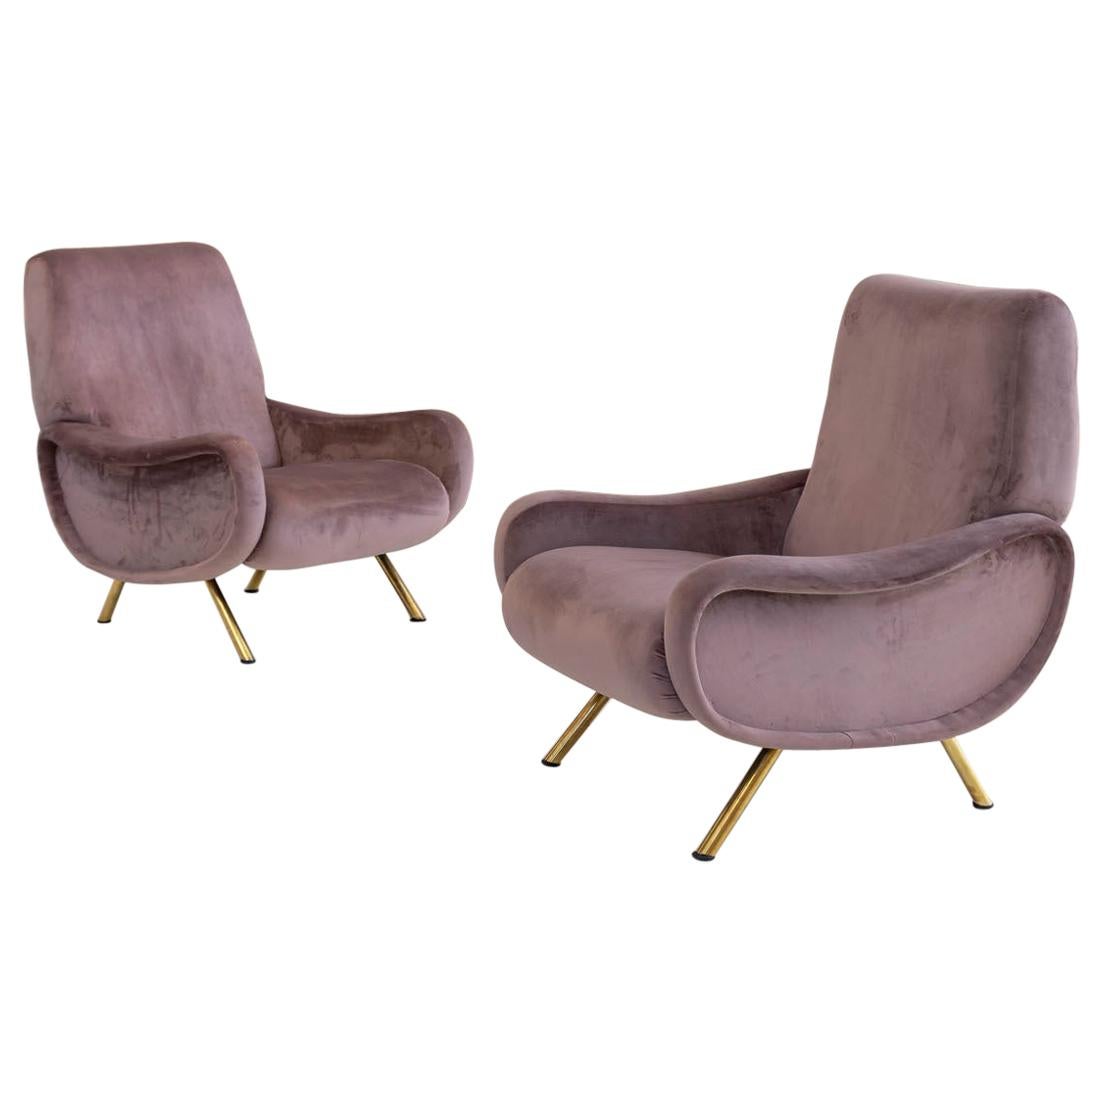 Pair of Lady Armchairs by Marco Zanuso for Arflex